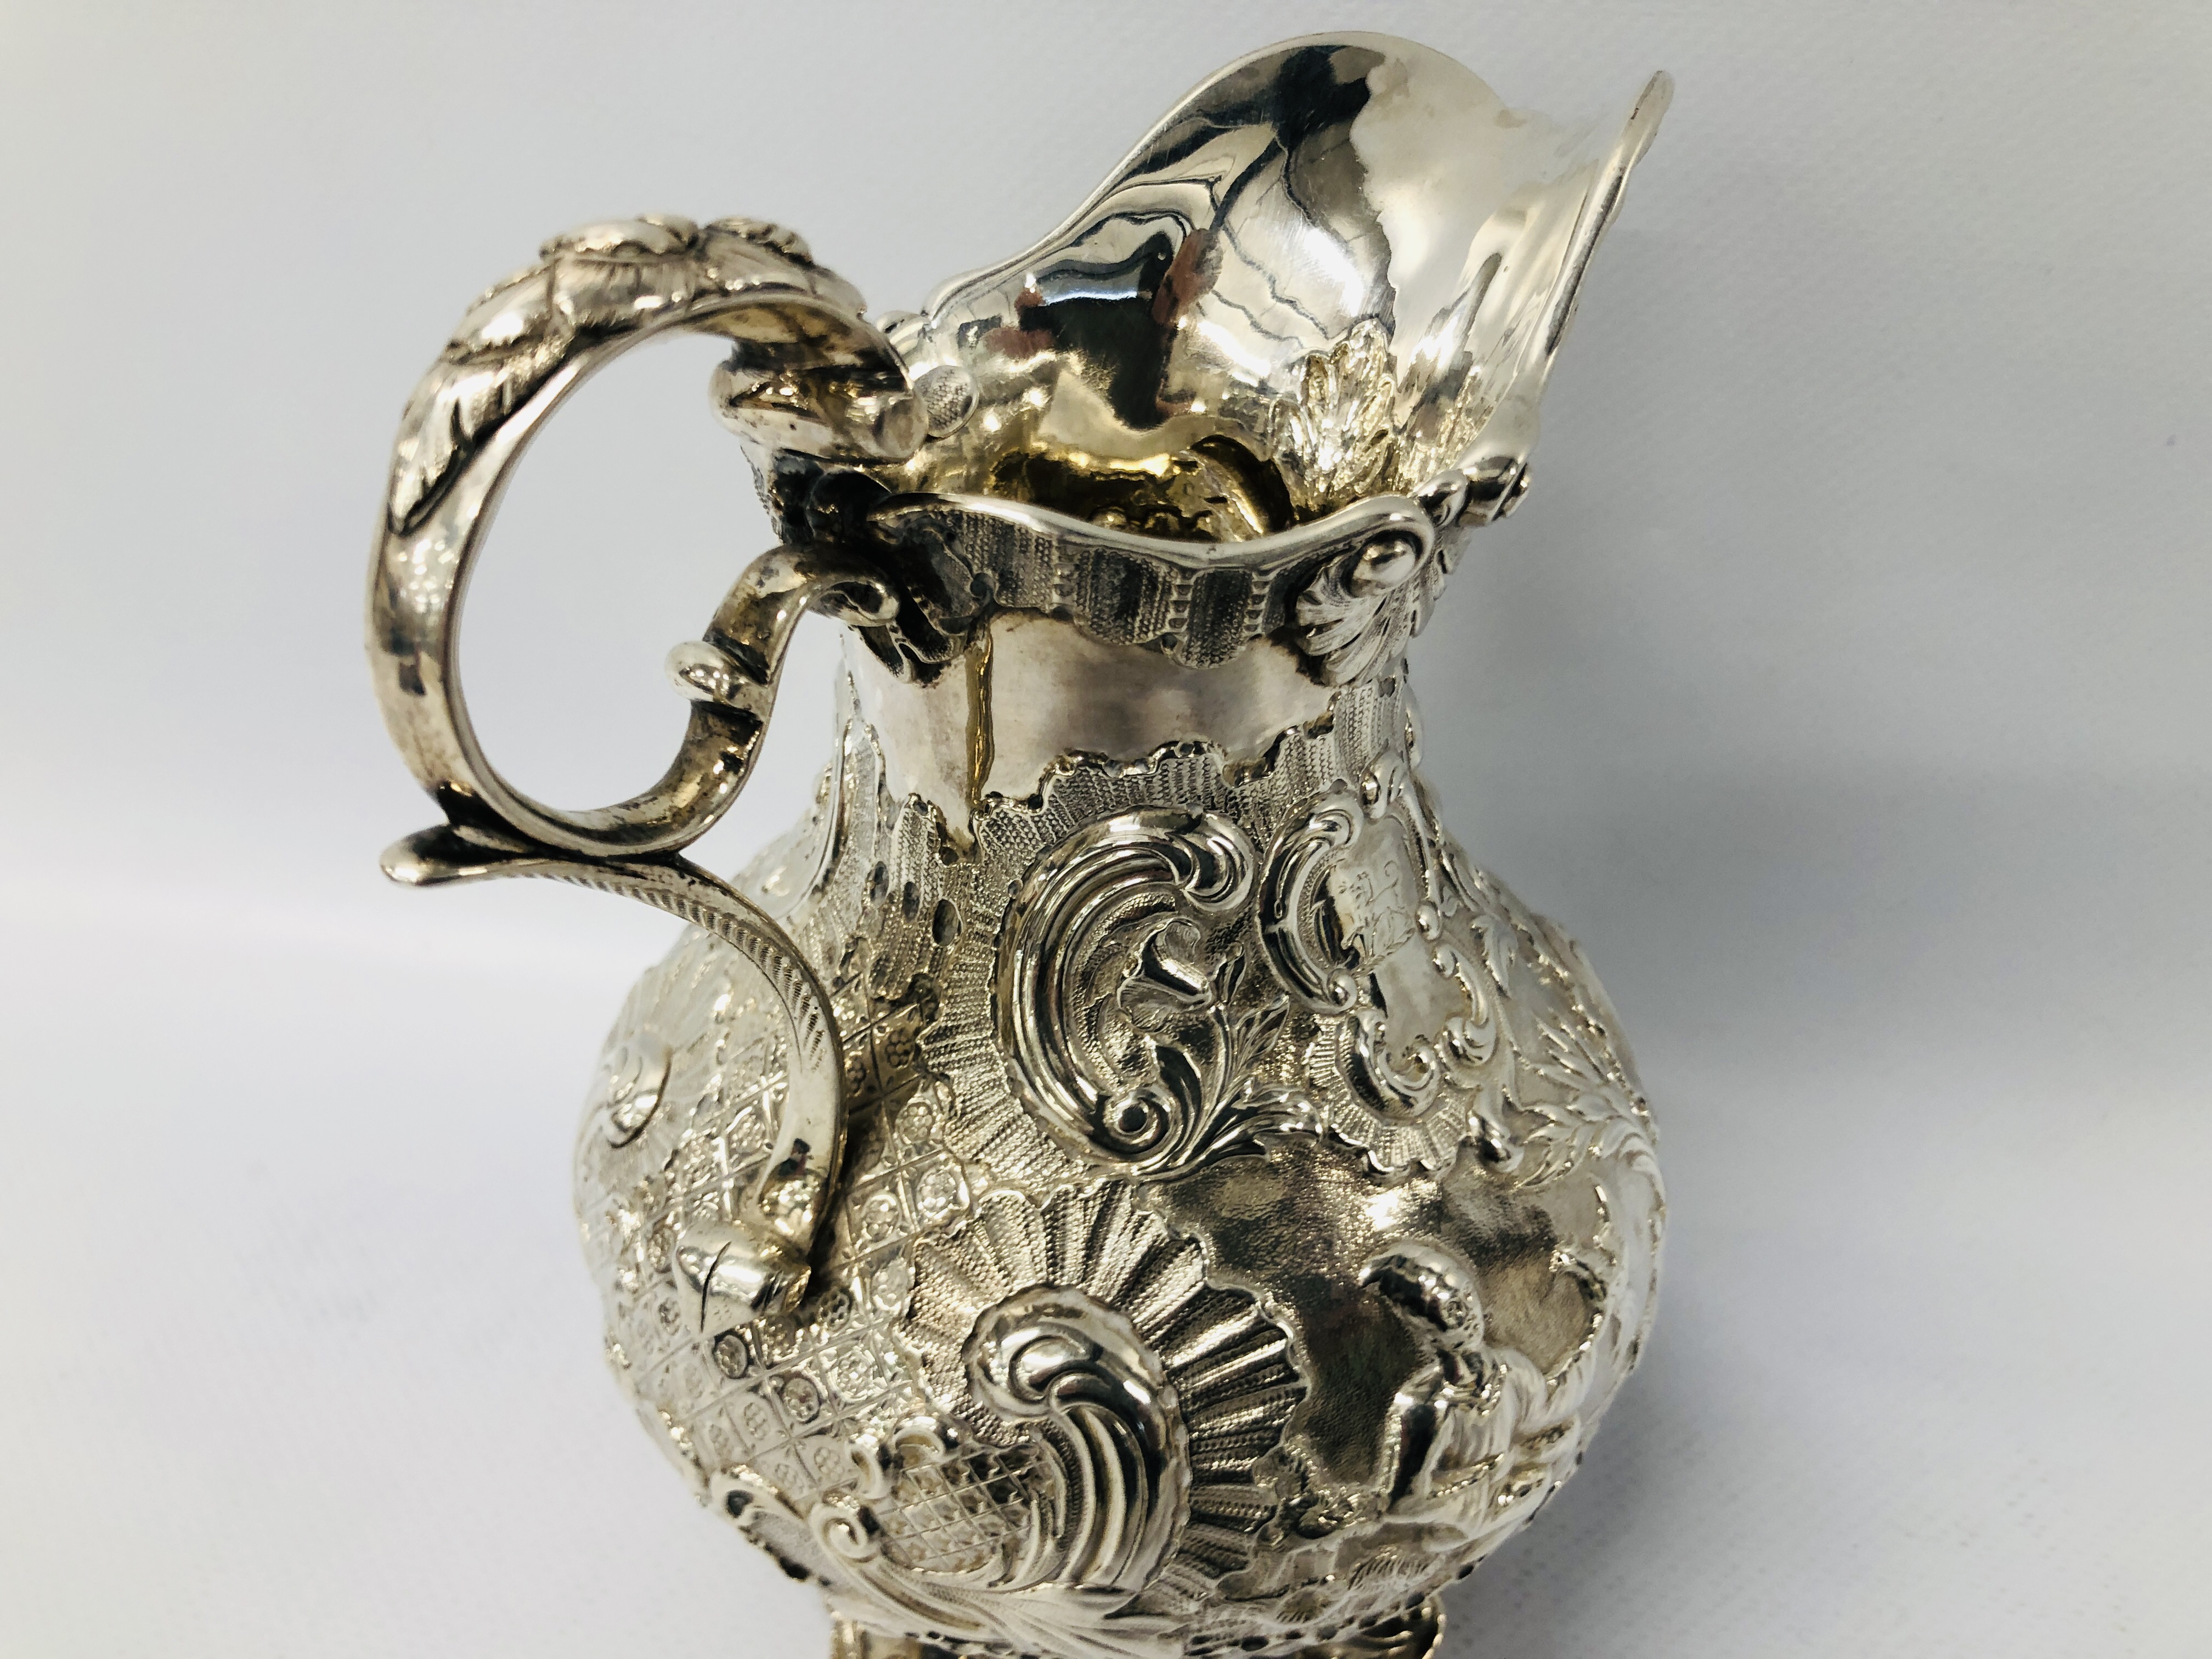 A SILVER MILK JUG OF ROCOCO DESIGN DECORATED WITH CHINOISERIE FIGURES WITH INSCRIPTION MR AND MRS J. - Image 12 of 25